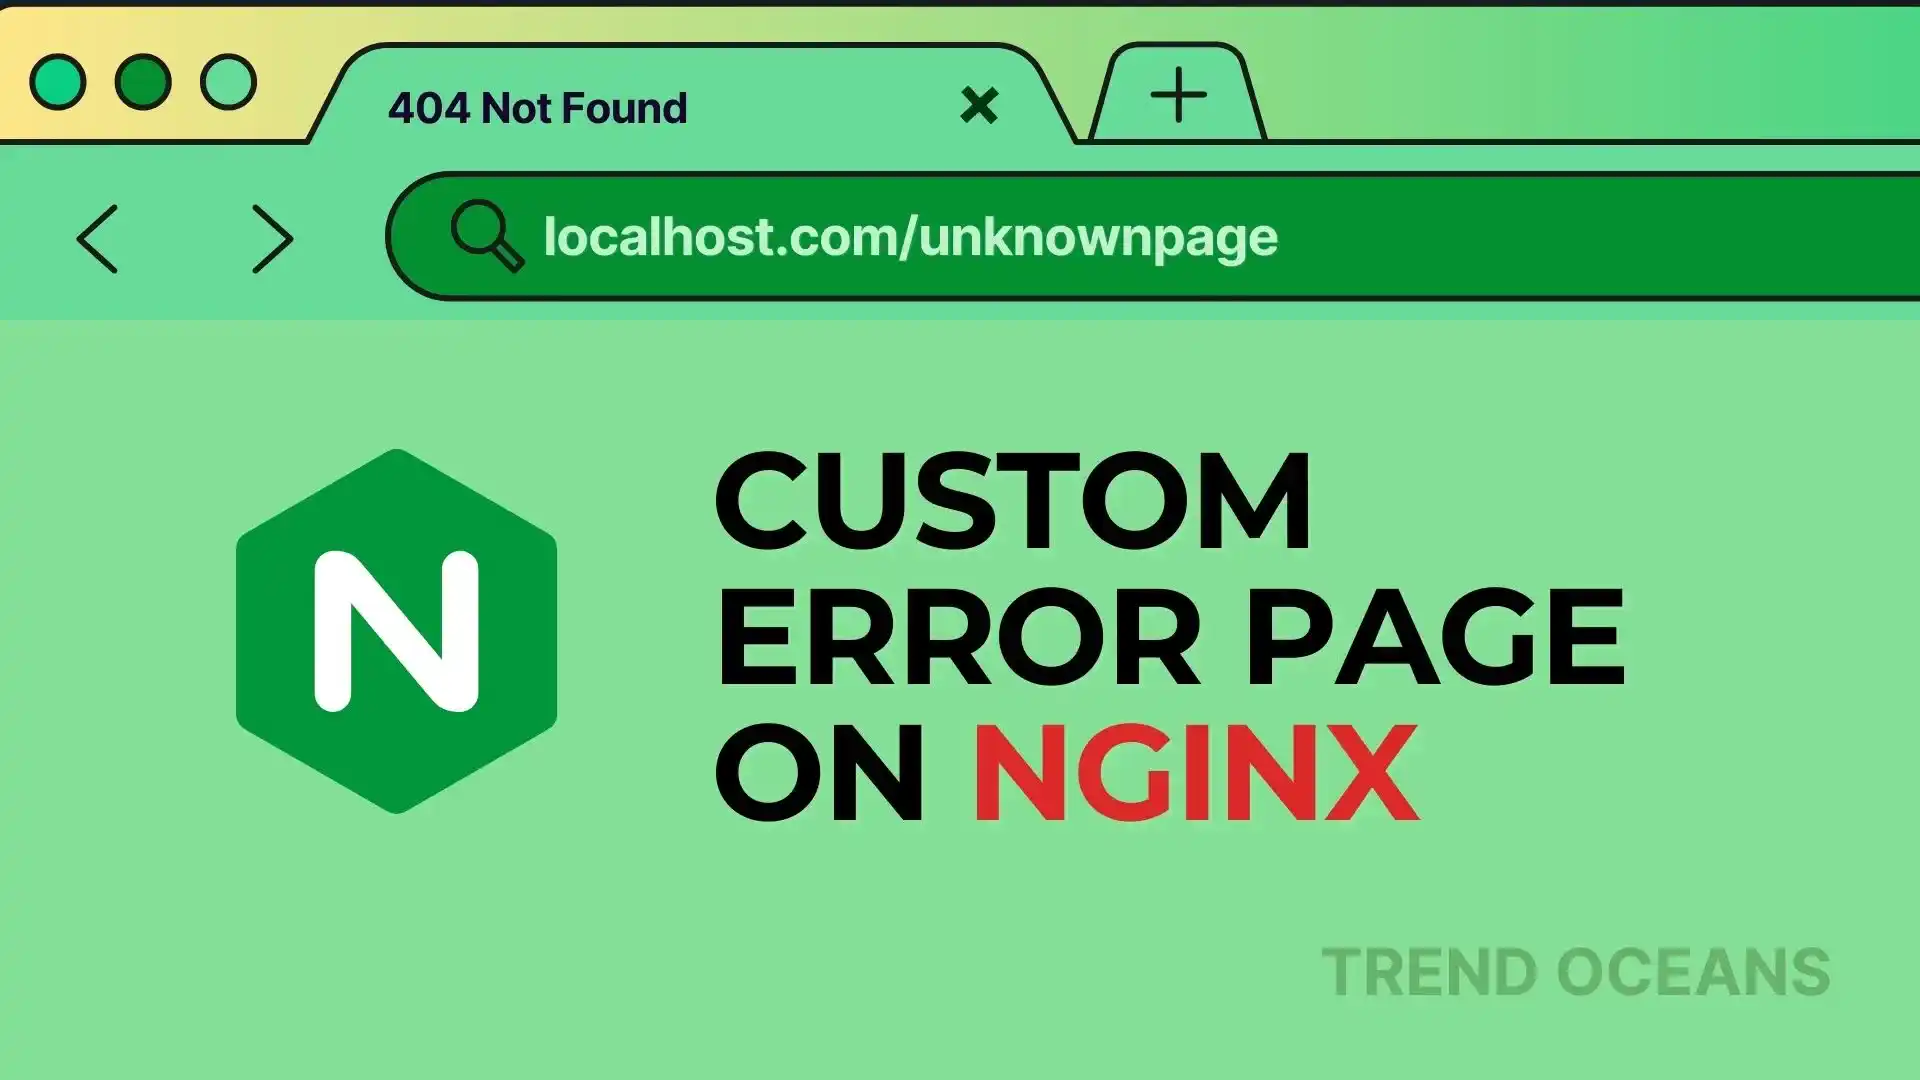 Create and Configure 404 Error Page in NGINX